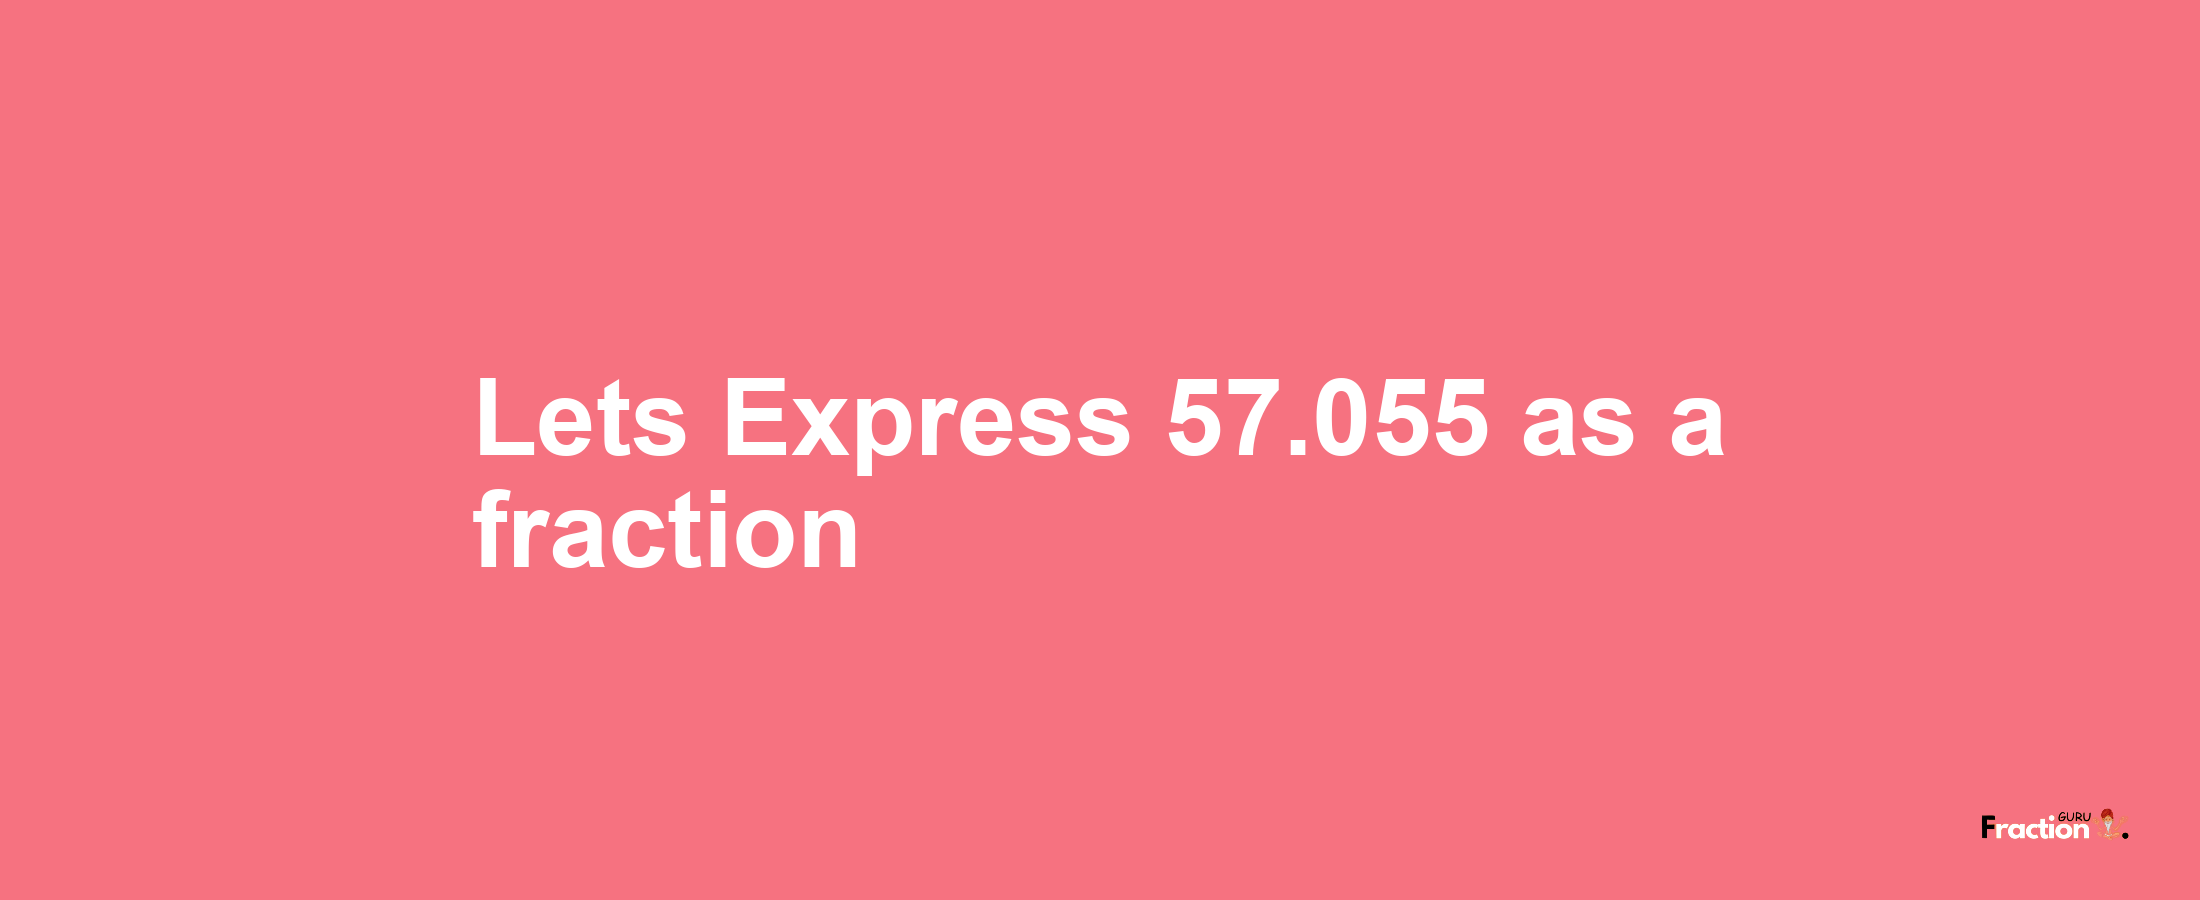 Lets Express 57.055 as afraction